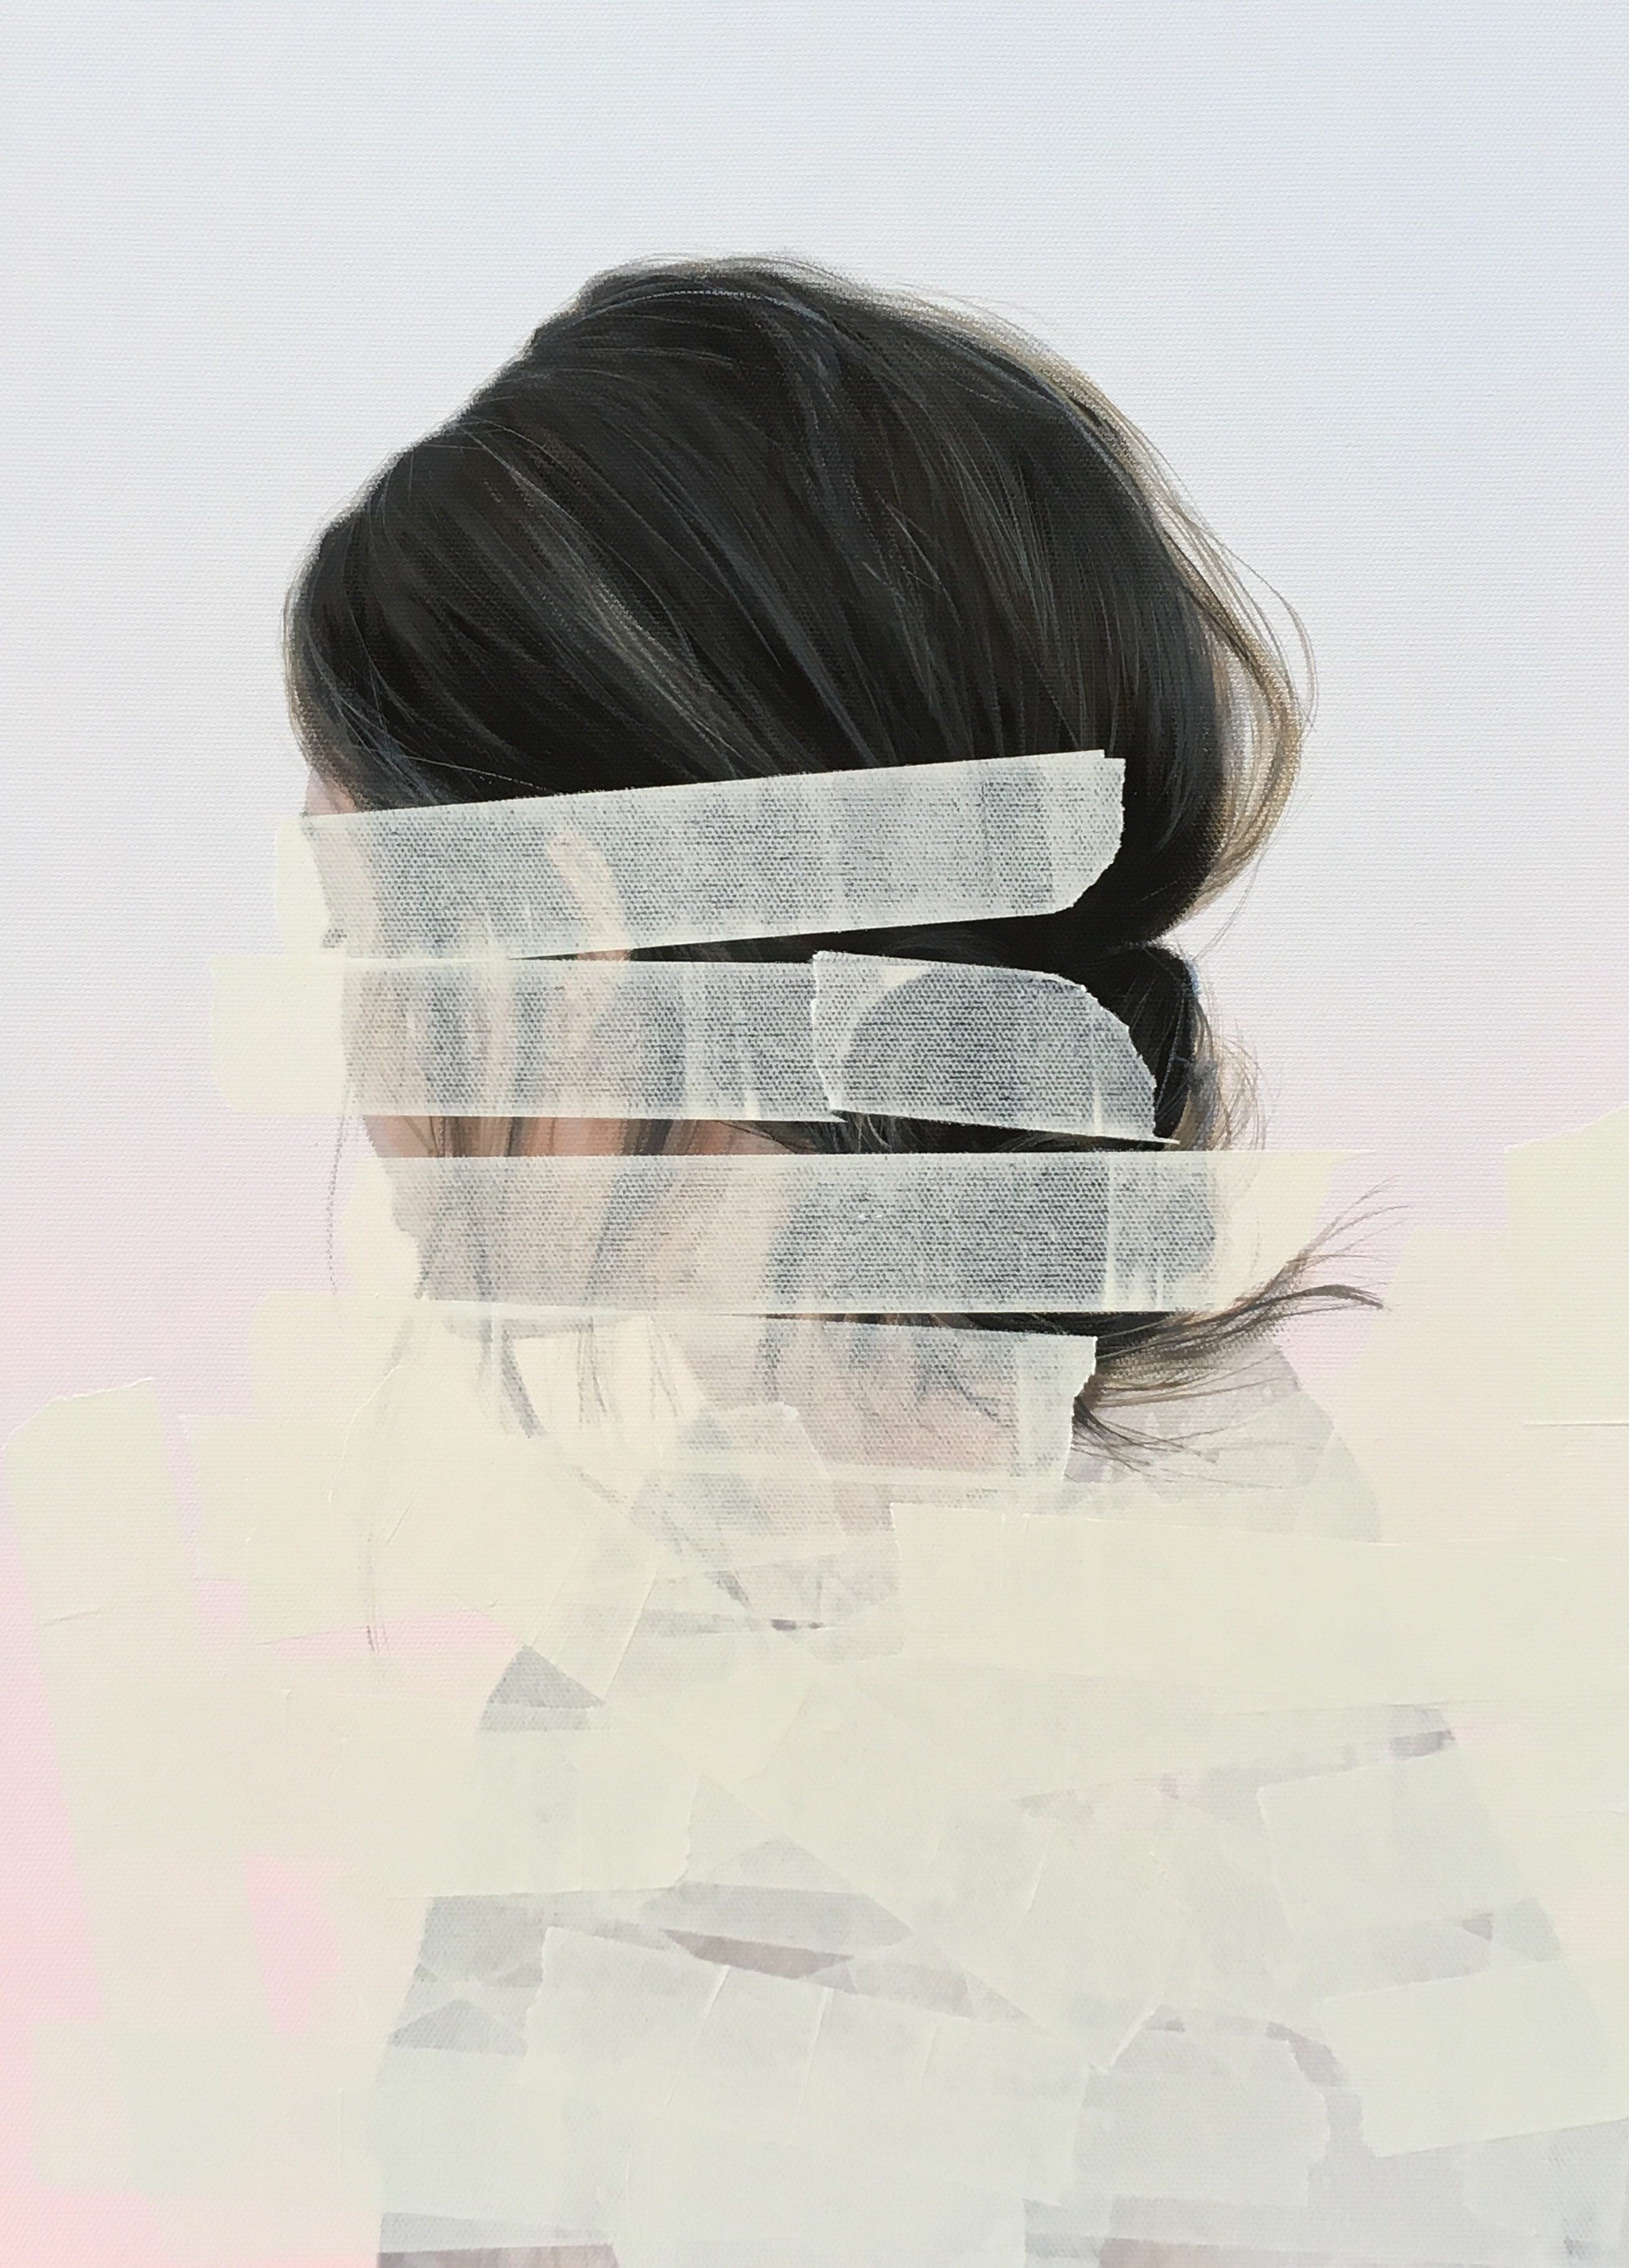 Sebastian Herzau creates – or rather abstracts  - portraits by painting or pasting over them.